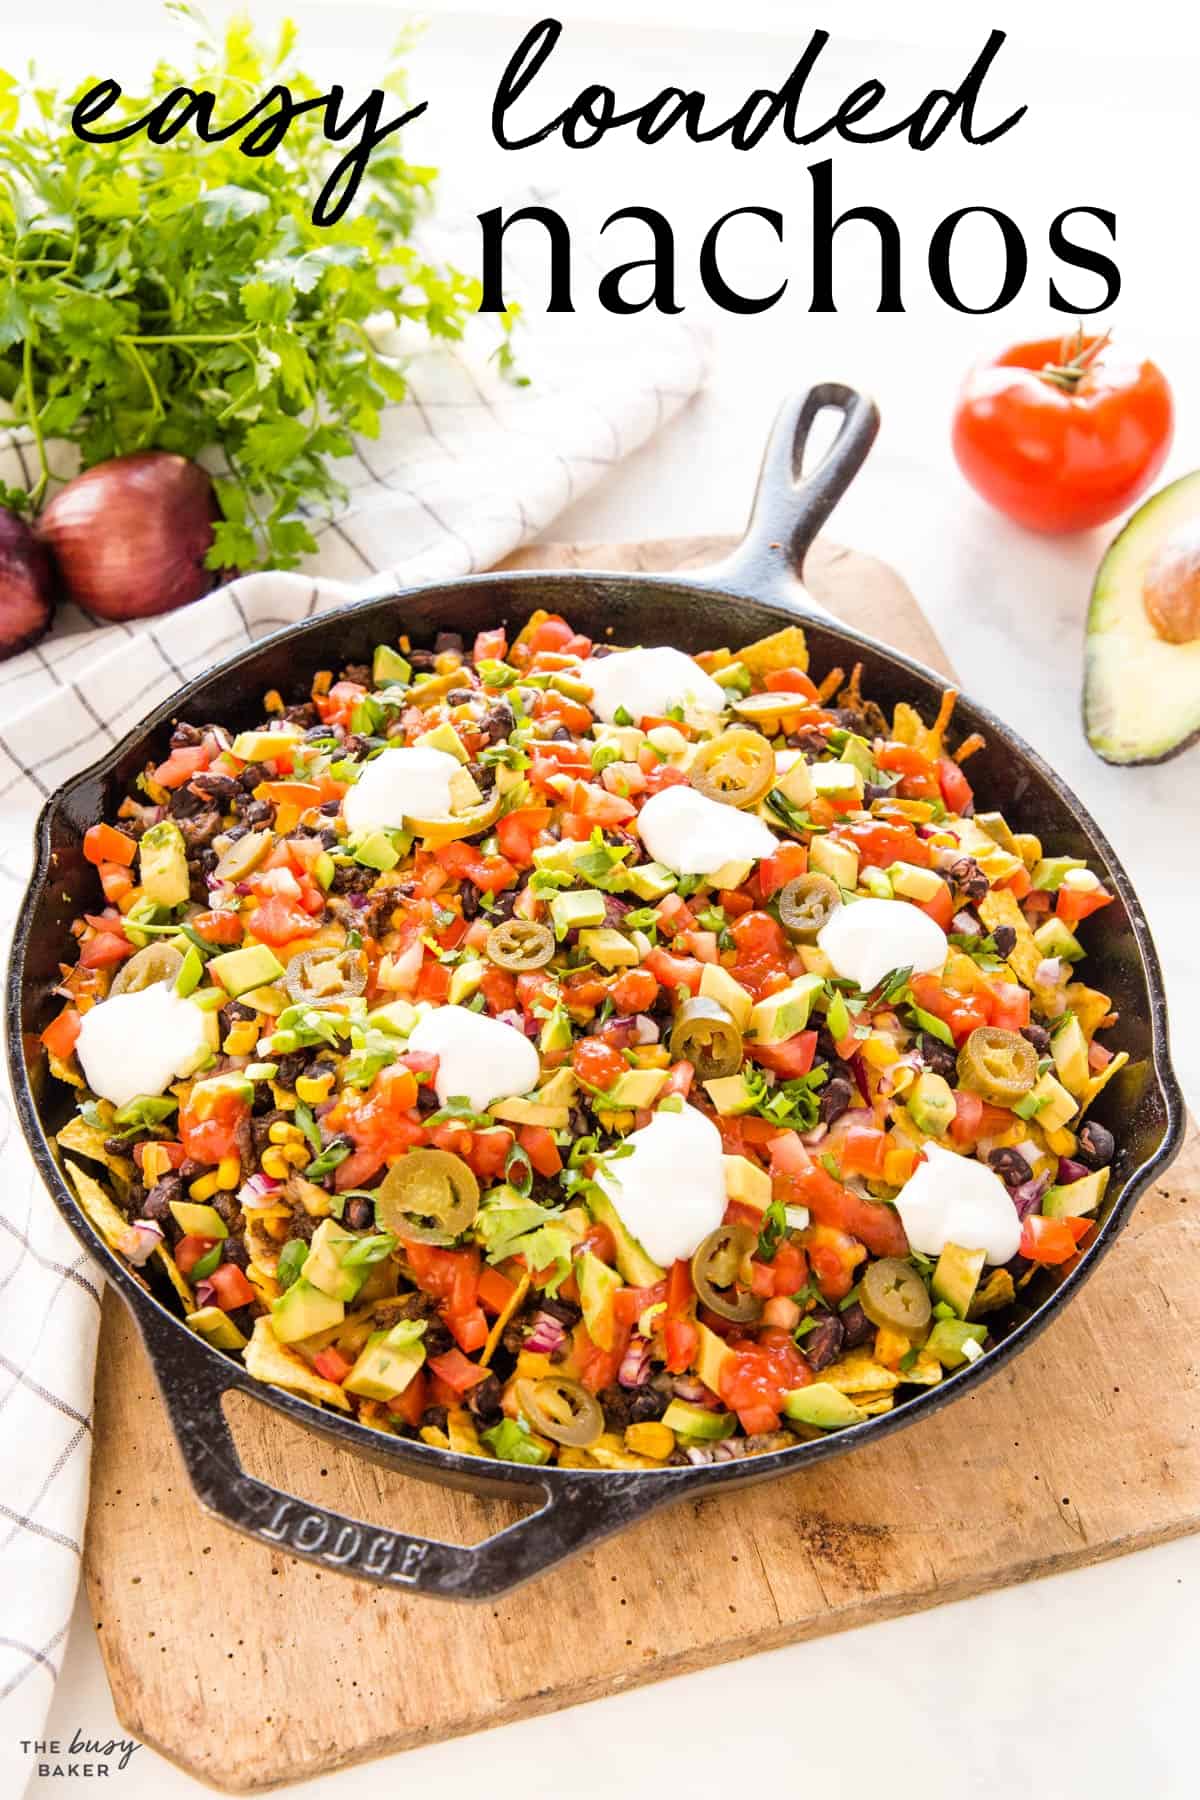 Loaded nachos in cast iron pan with text